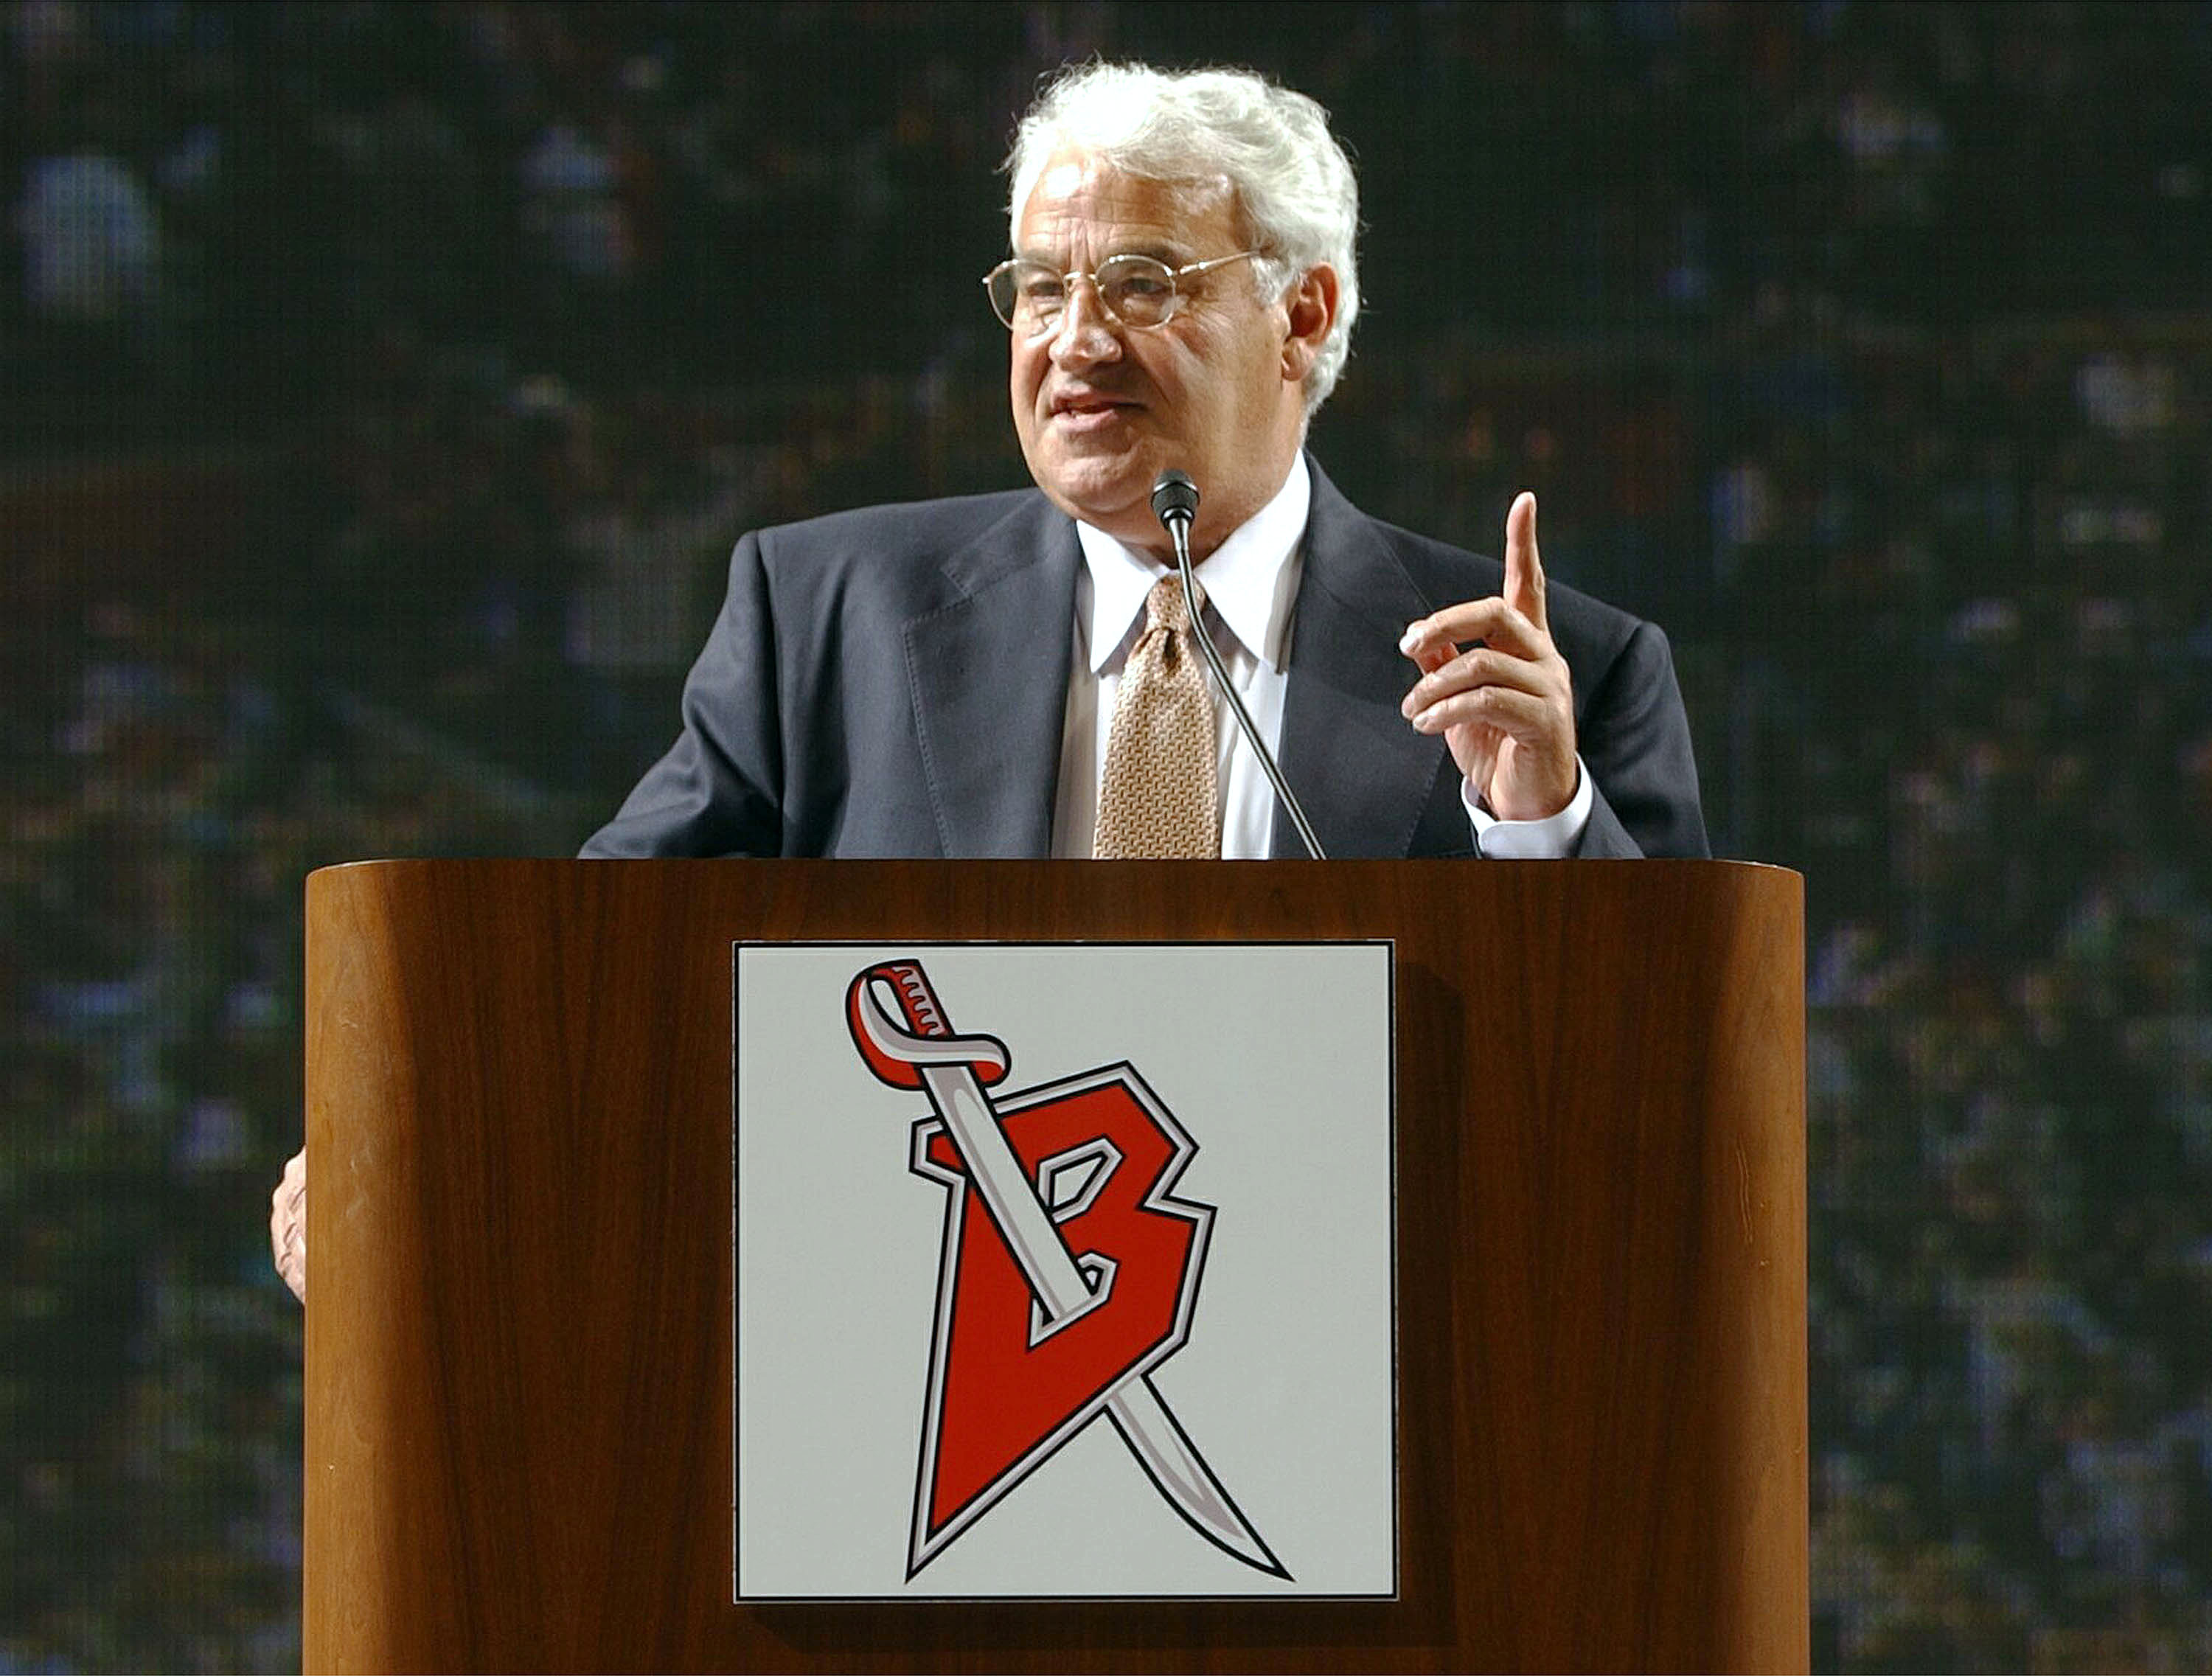 Sabers introduce Golisano as new owner